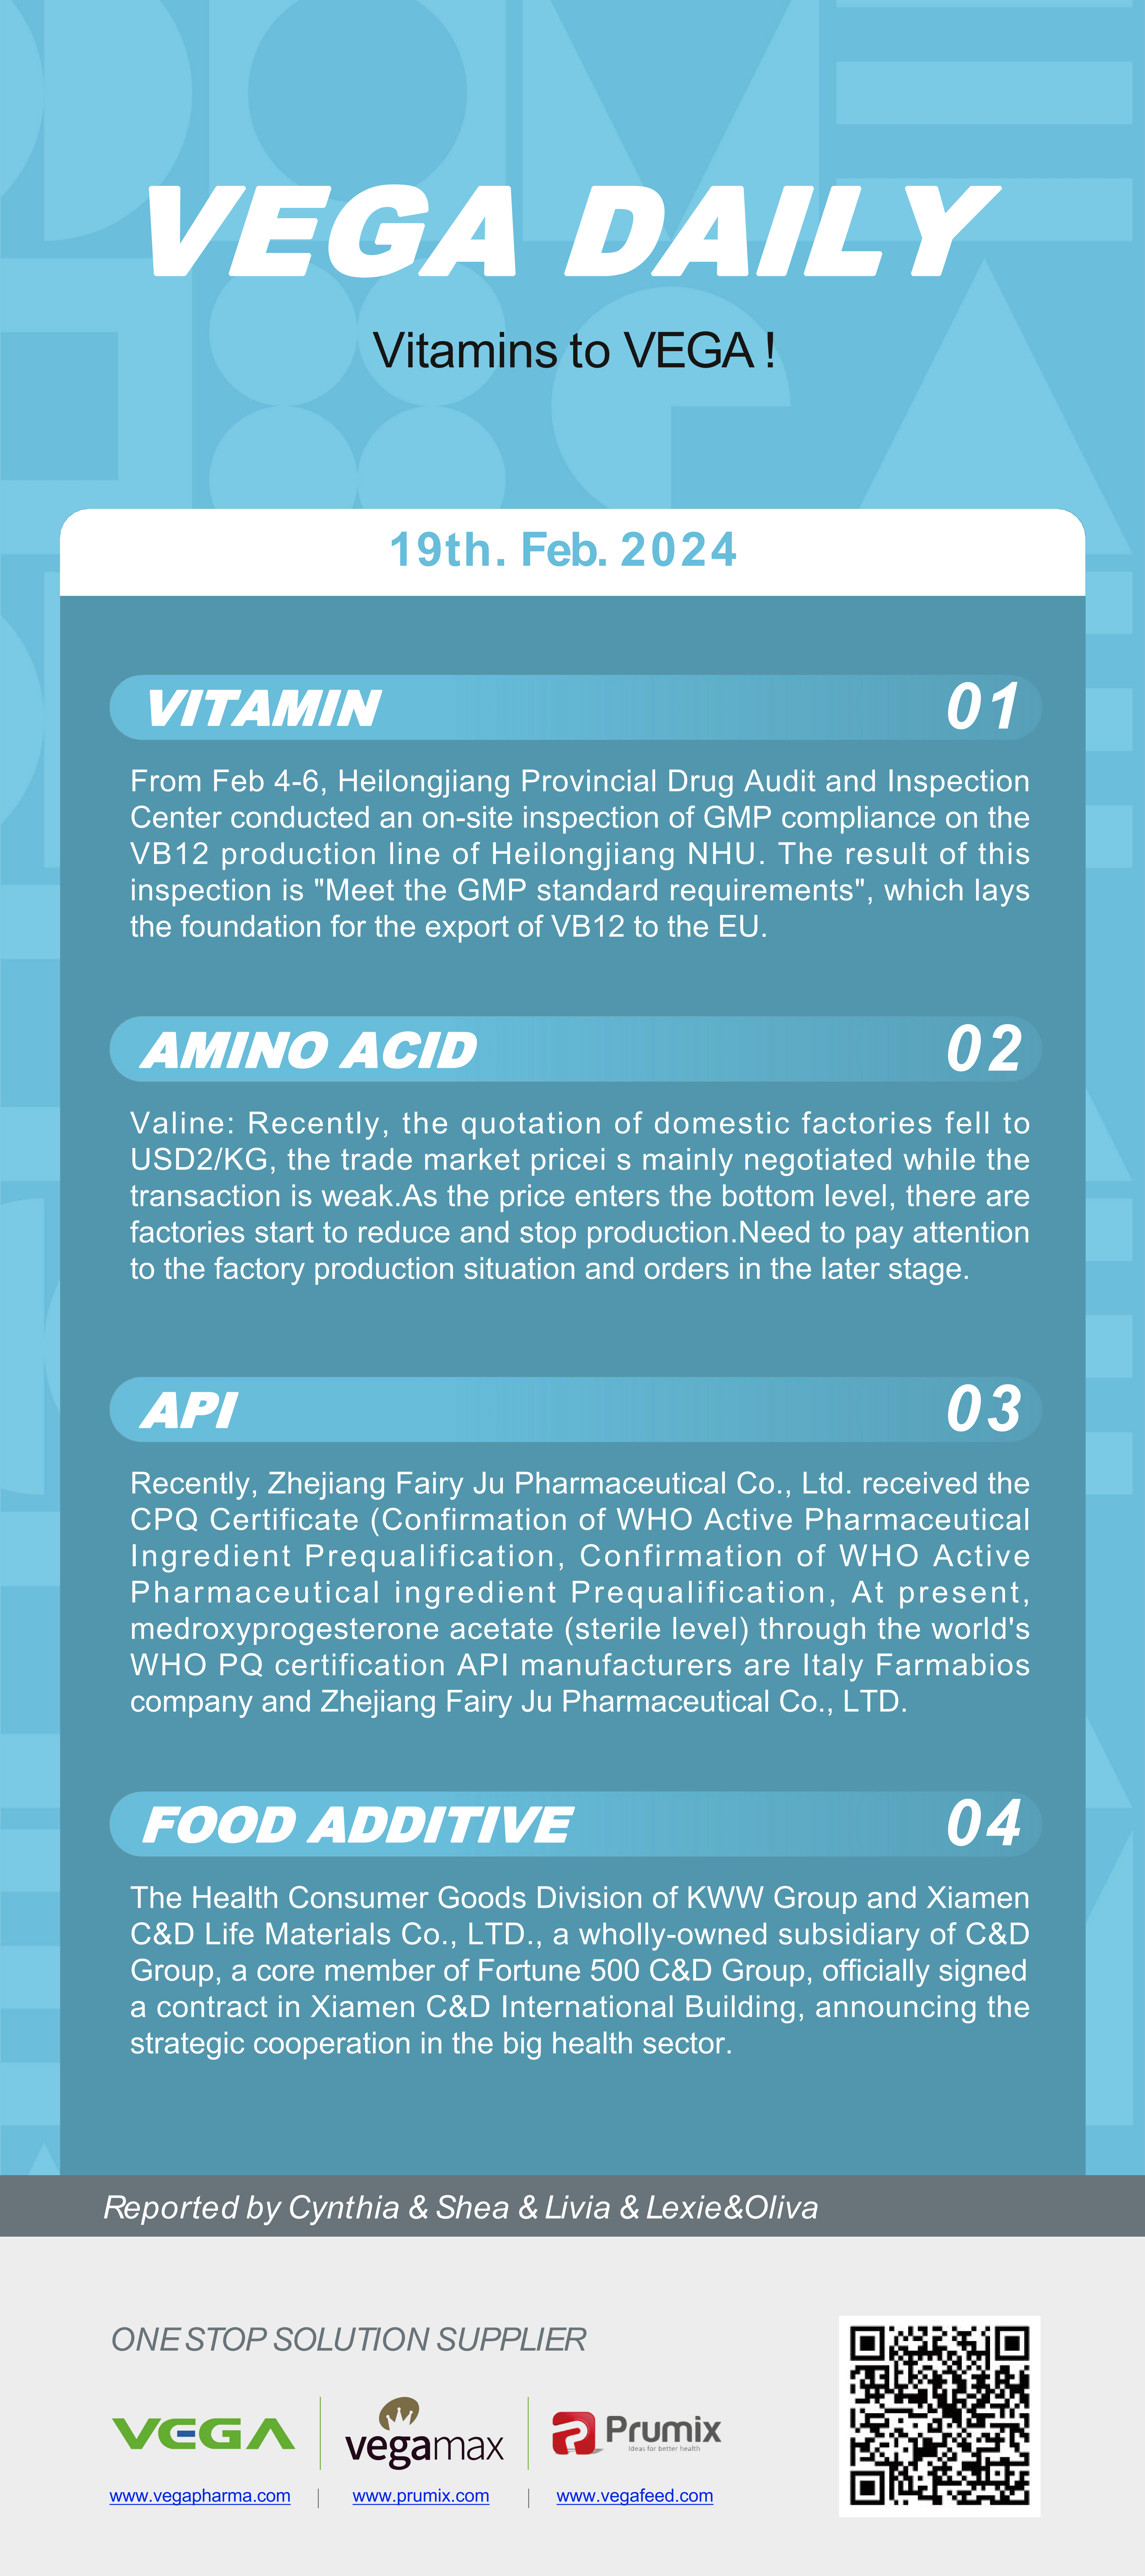 Vega Daily Dated on Fab 19th 2024 Vitamin Amino Acid APl Food Additives.png